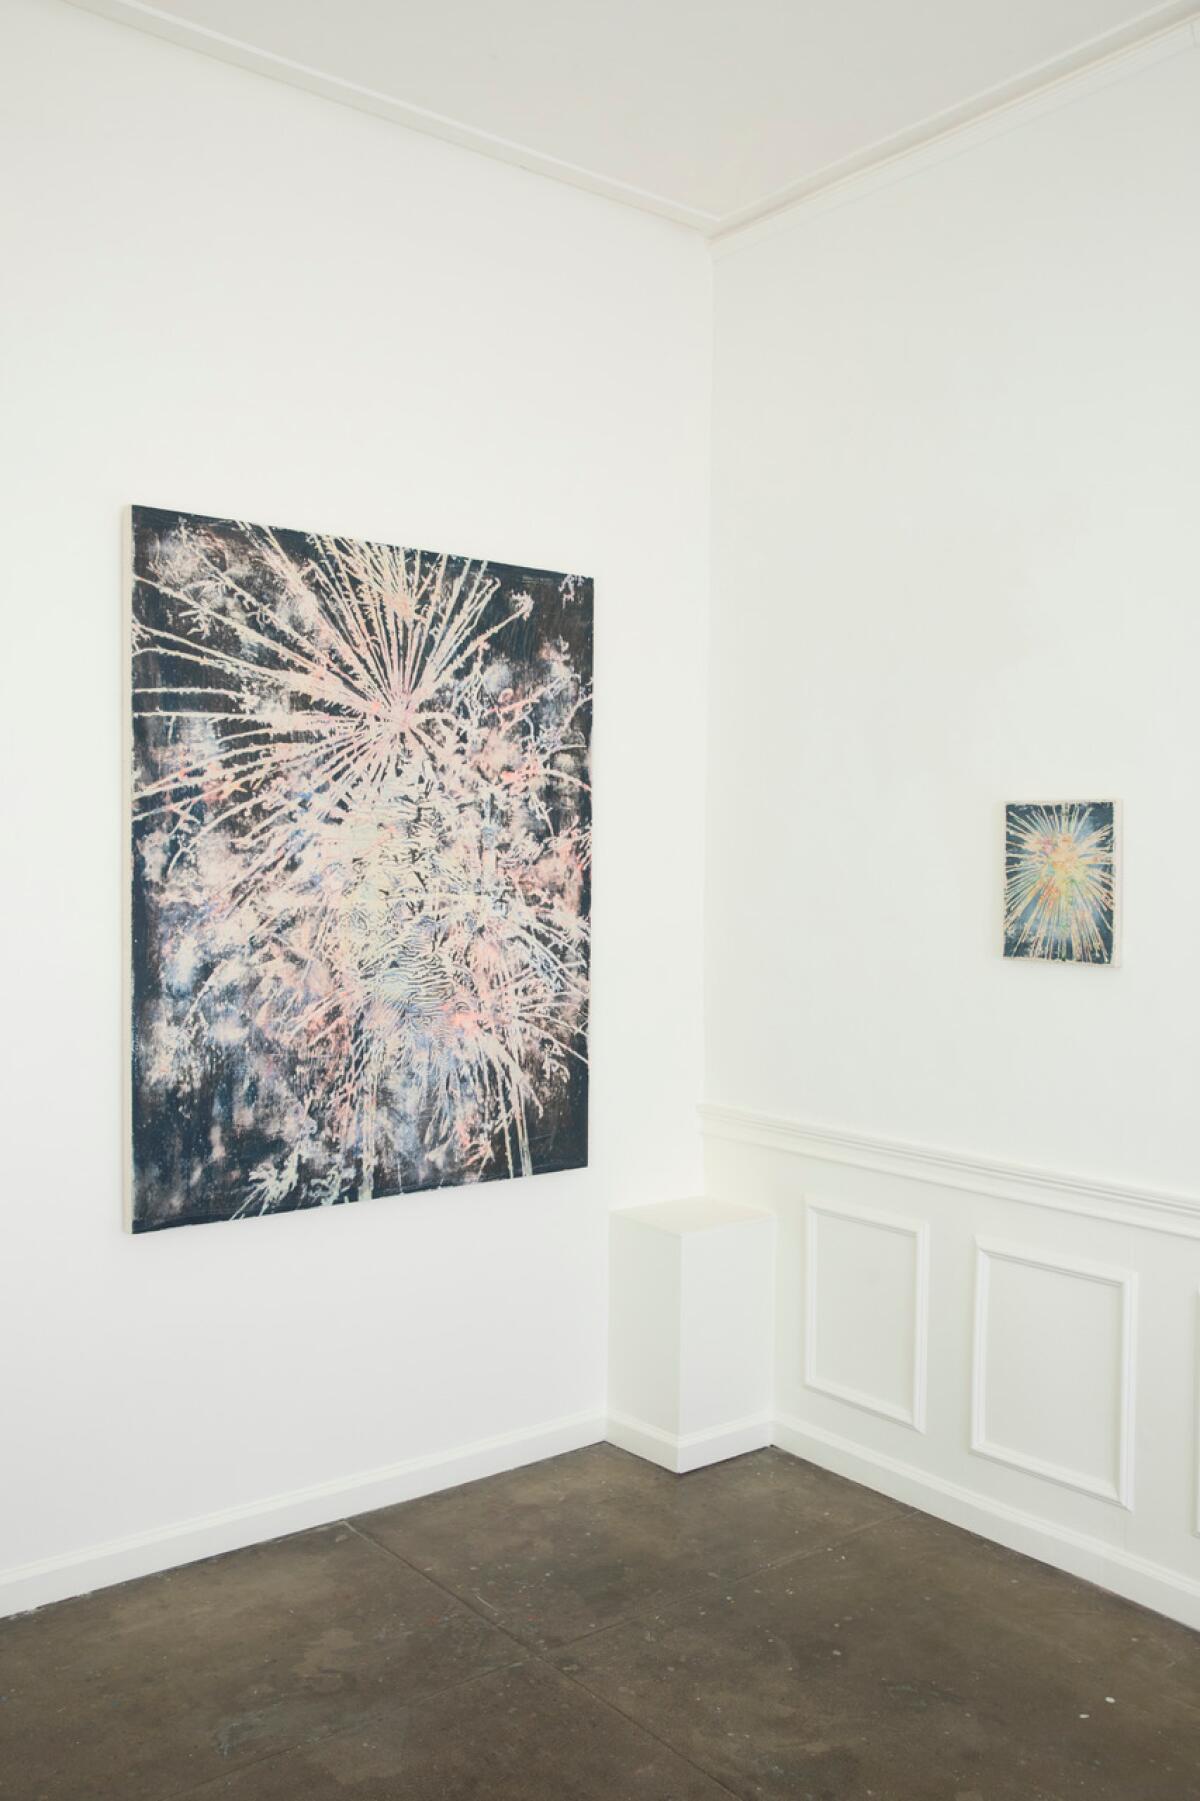 A painting of fireworks.